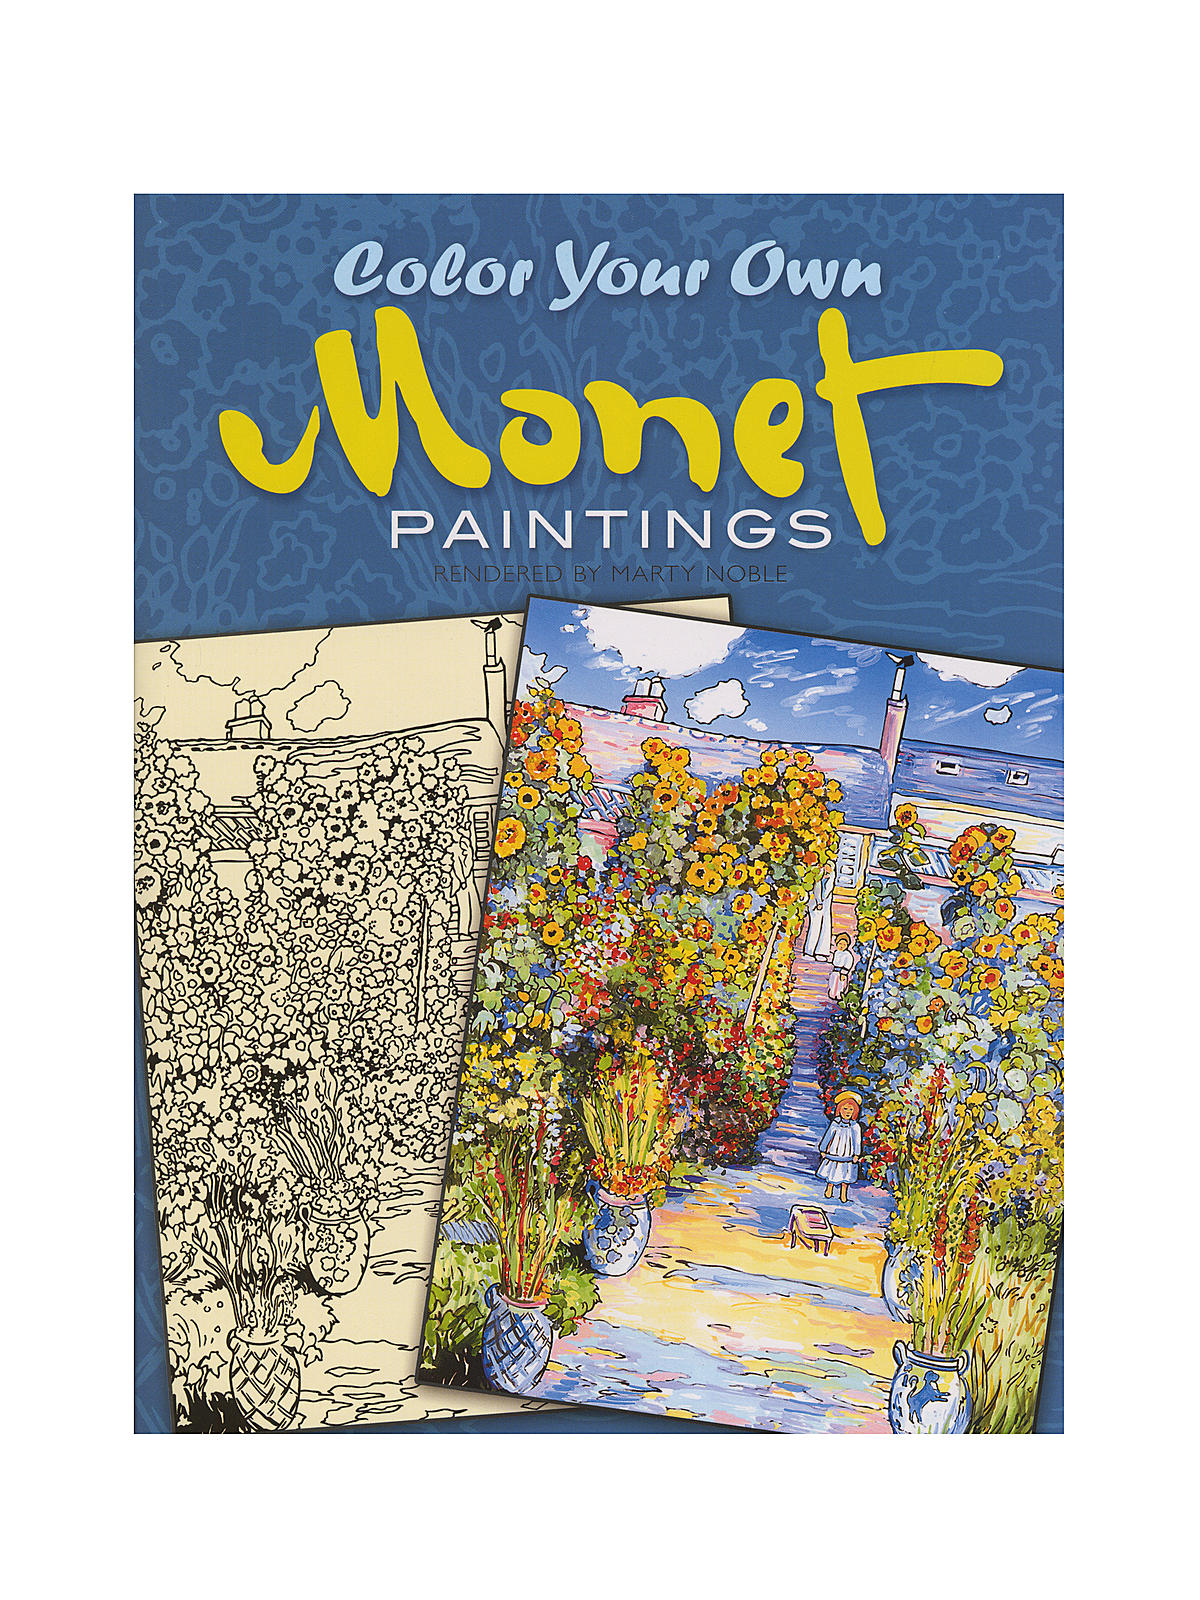 Masterworks: Color Your Own Coloring Book Monet Paintings